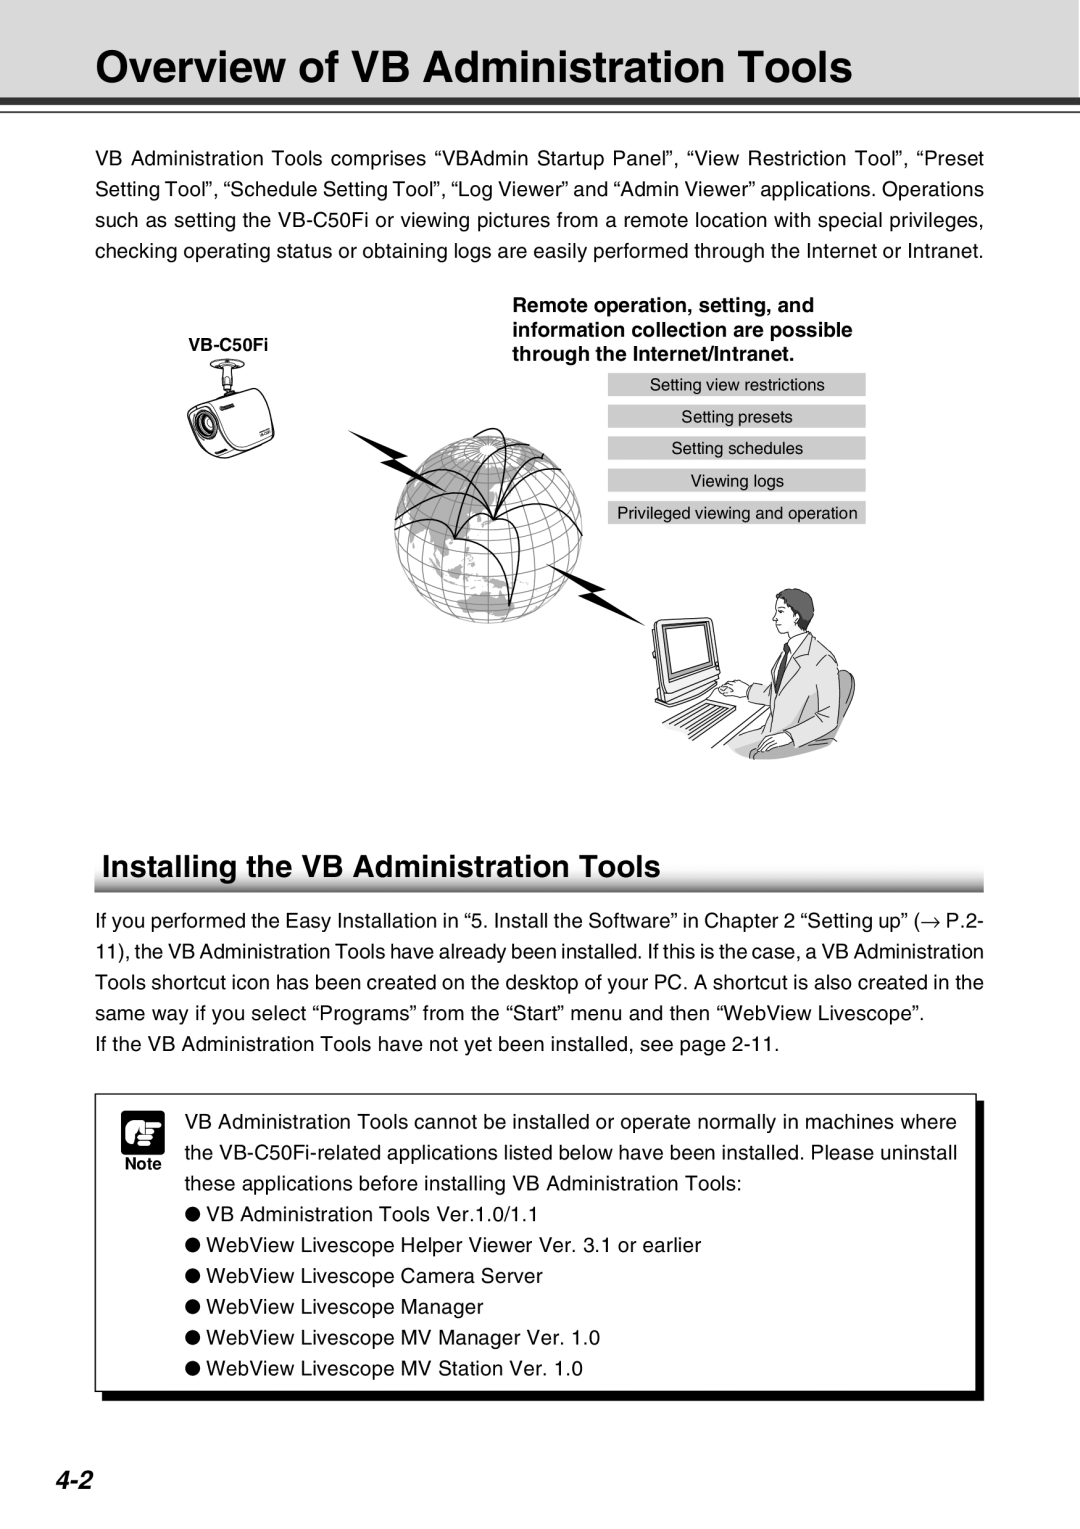 Canon Vb-C50fi Overview of VB Administration Tools, Installing the VB Administration Tools, through the Internet/Intranet 